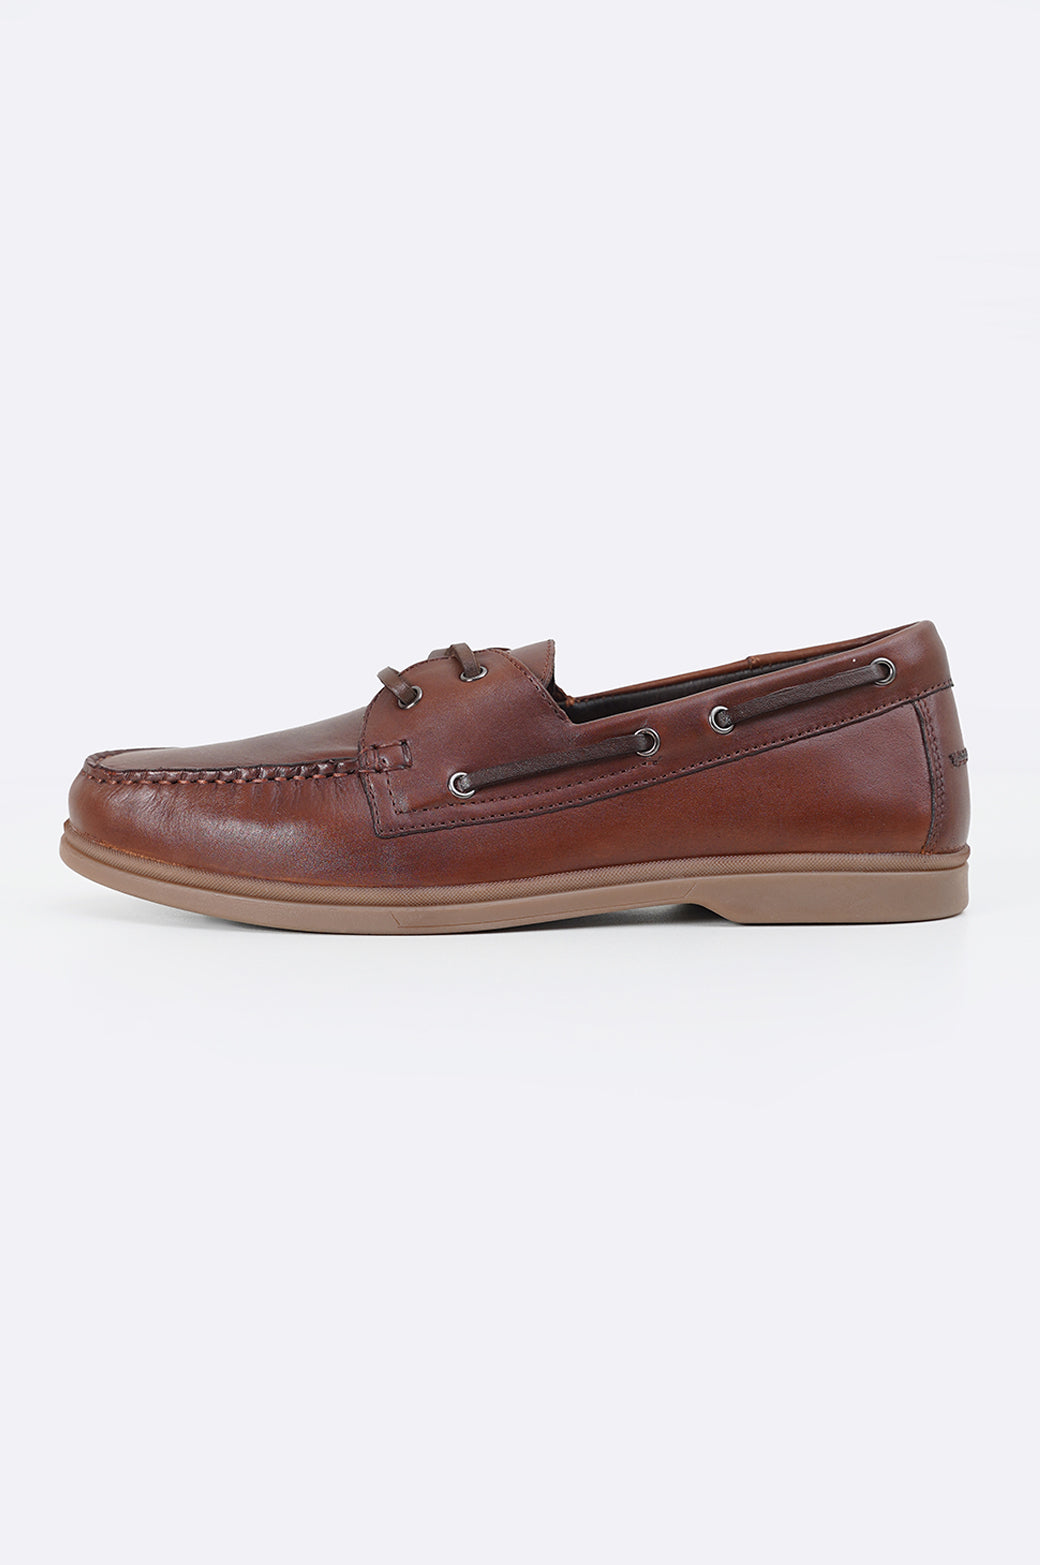 DARK BROWN LEATHER BOAT SHOES